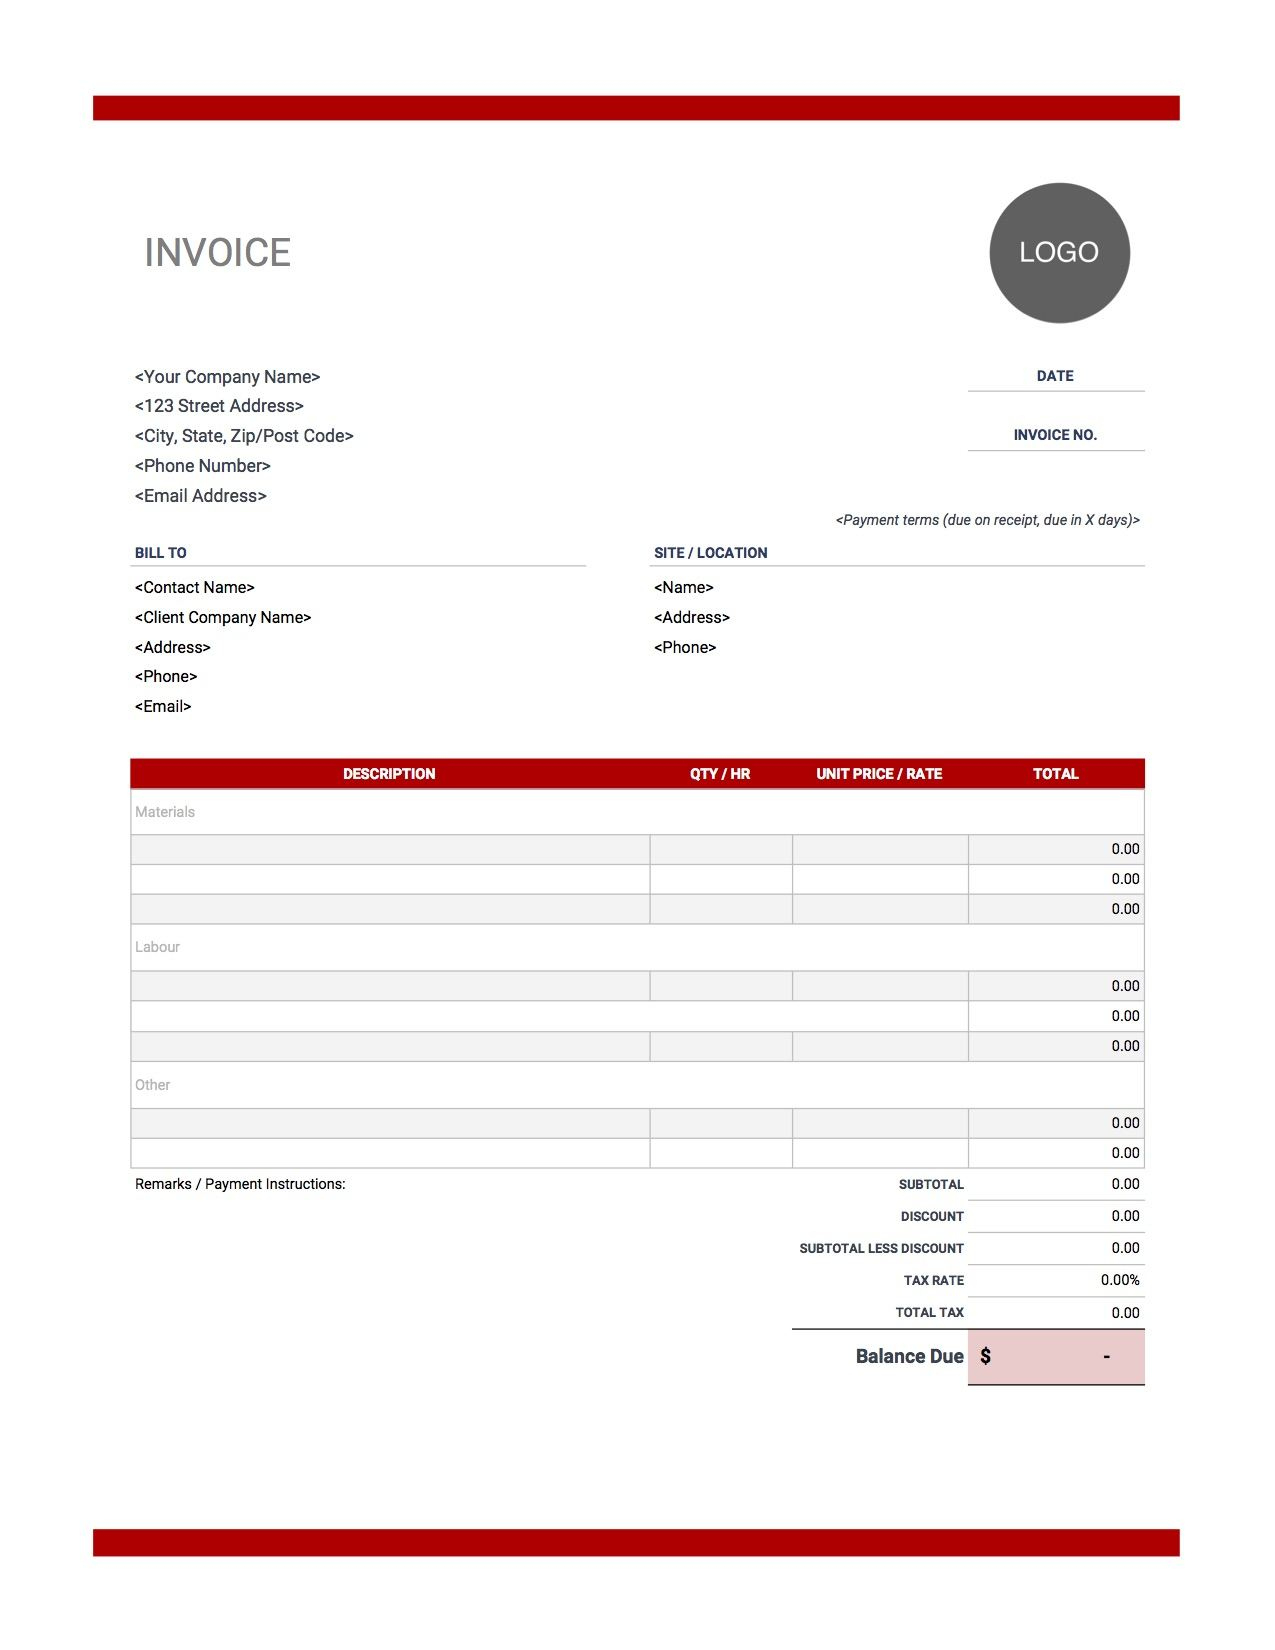 Contractor Invoice Templates | Free Download | Invoice Simple throughout Invoice For Work Done Template